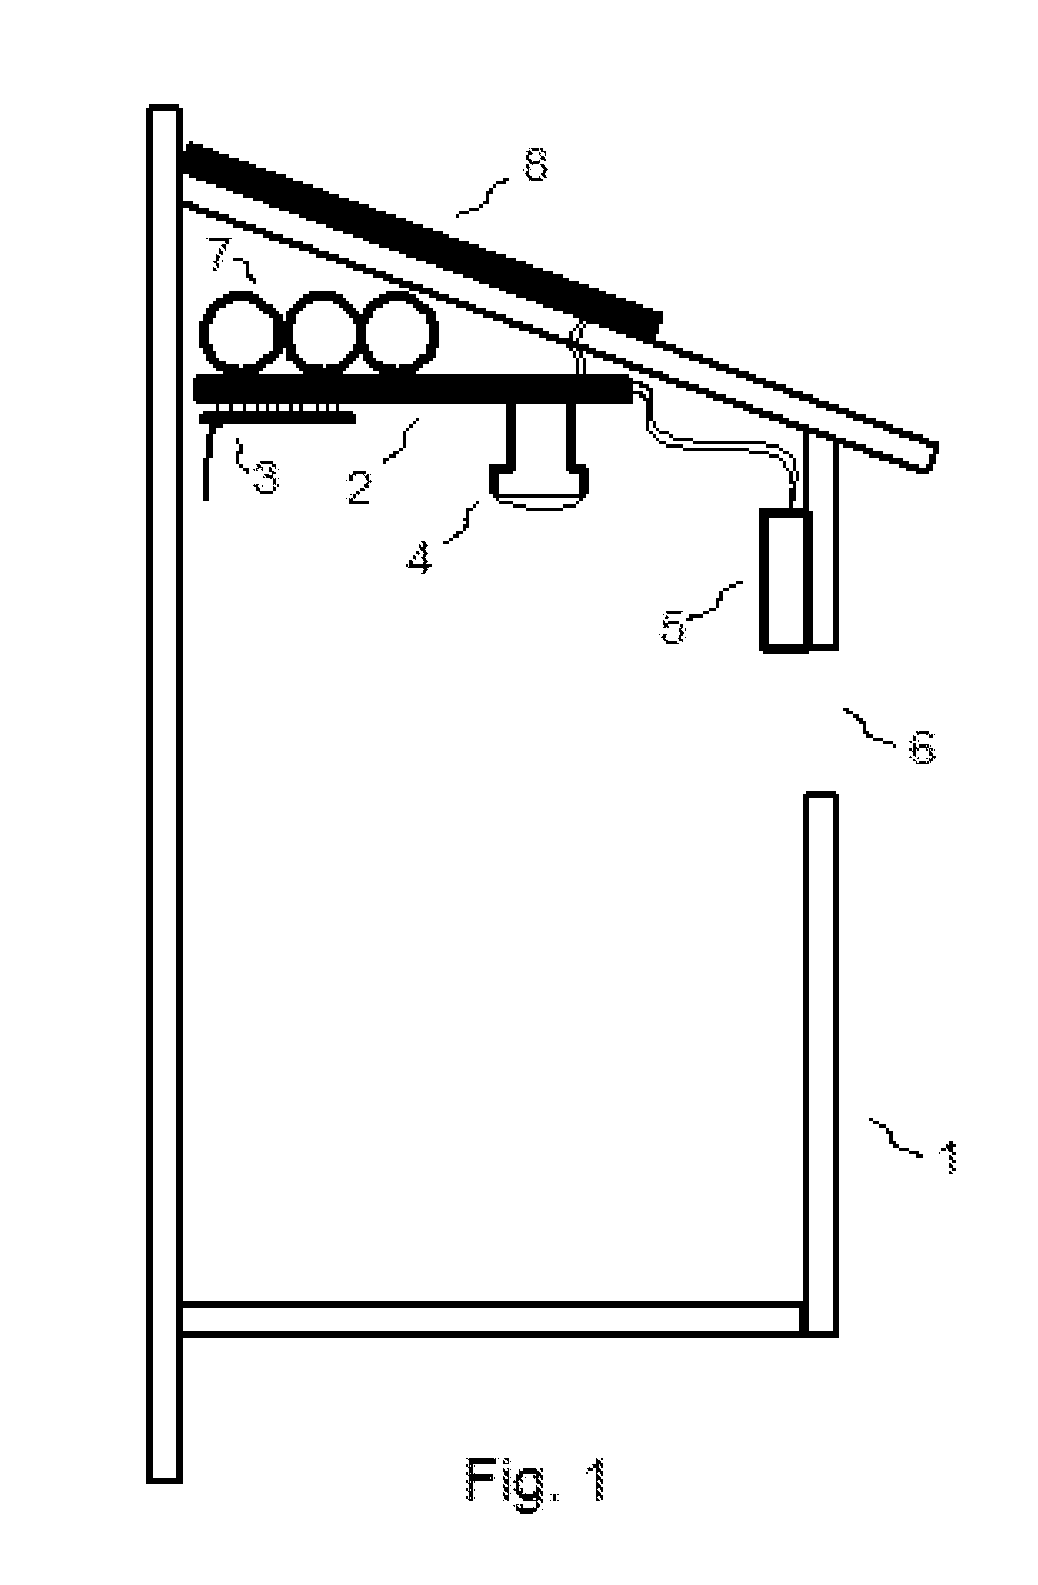 Method and apparatus for encouraging citizens to acquire biological data by adding sensors to a camera-equipped birdhouse